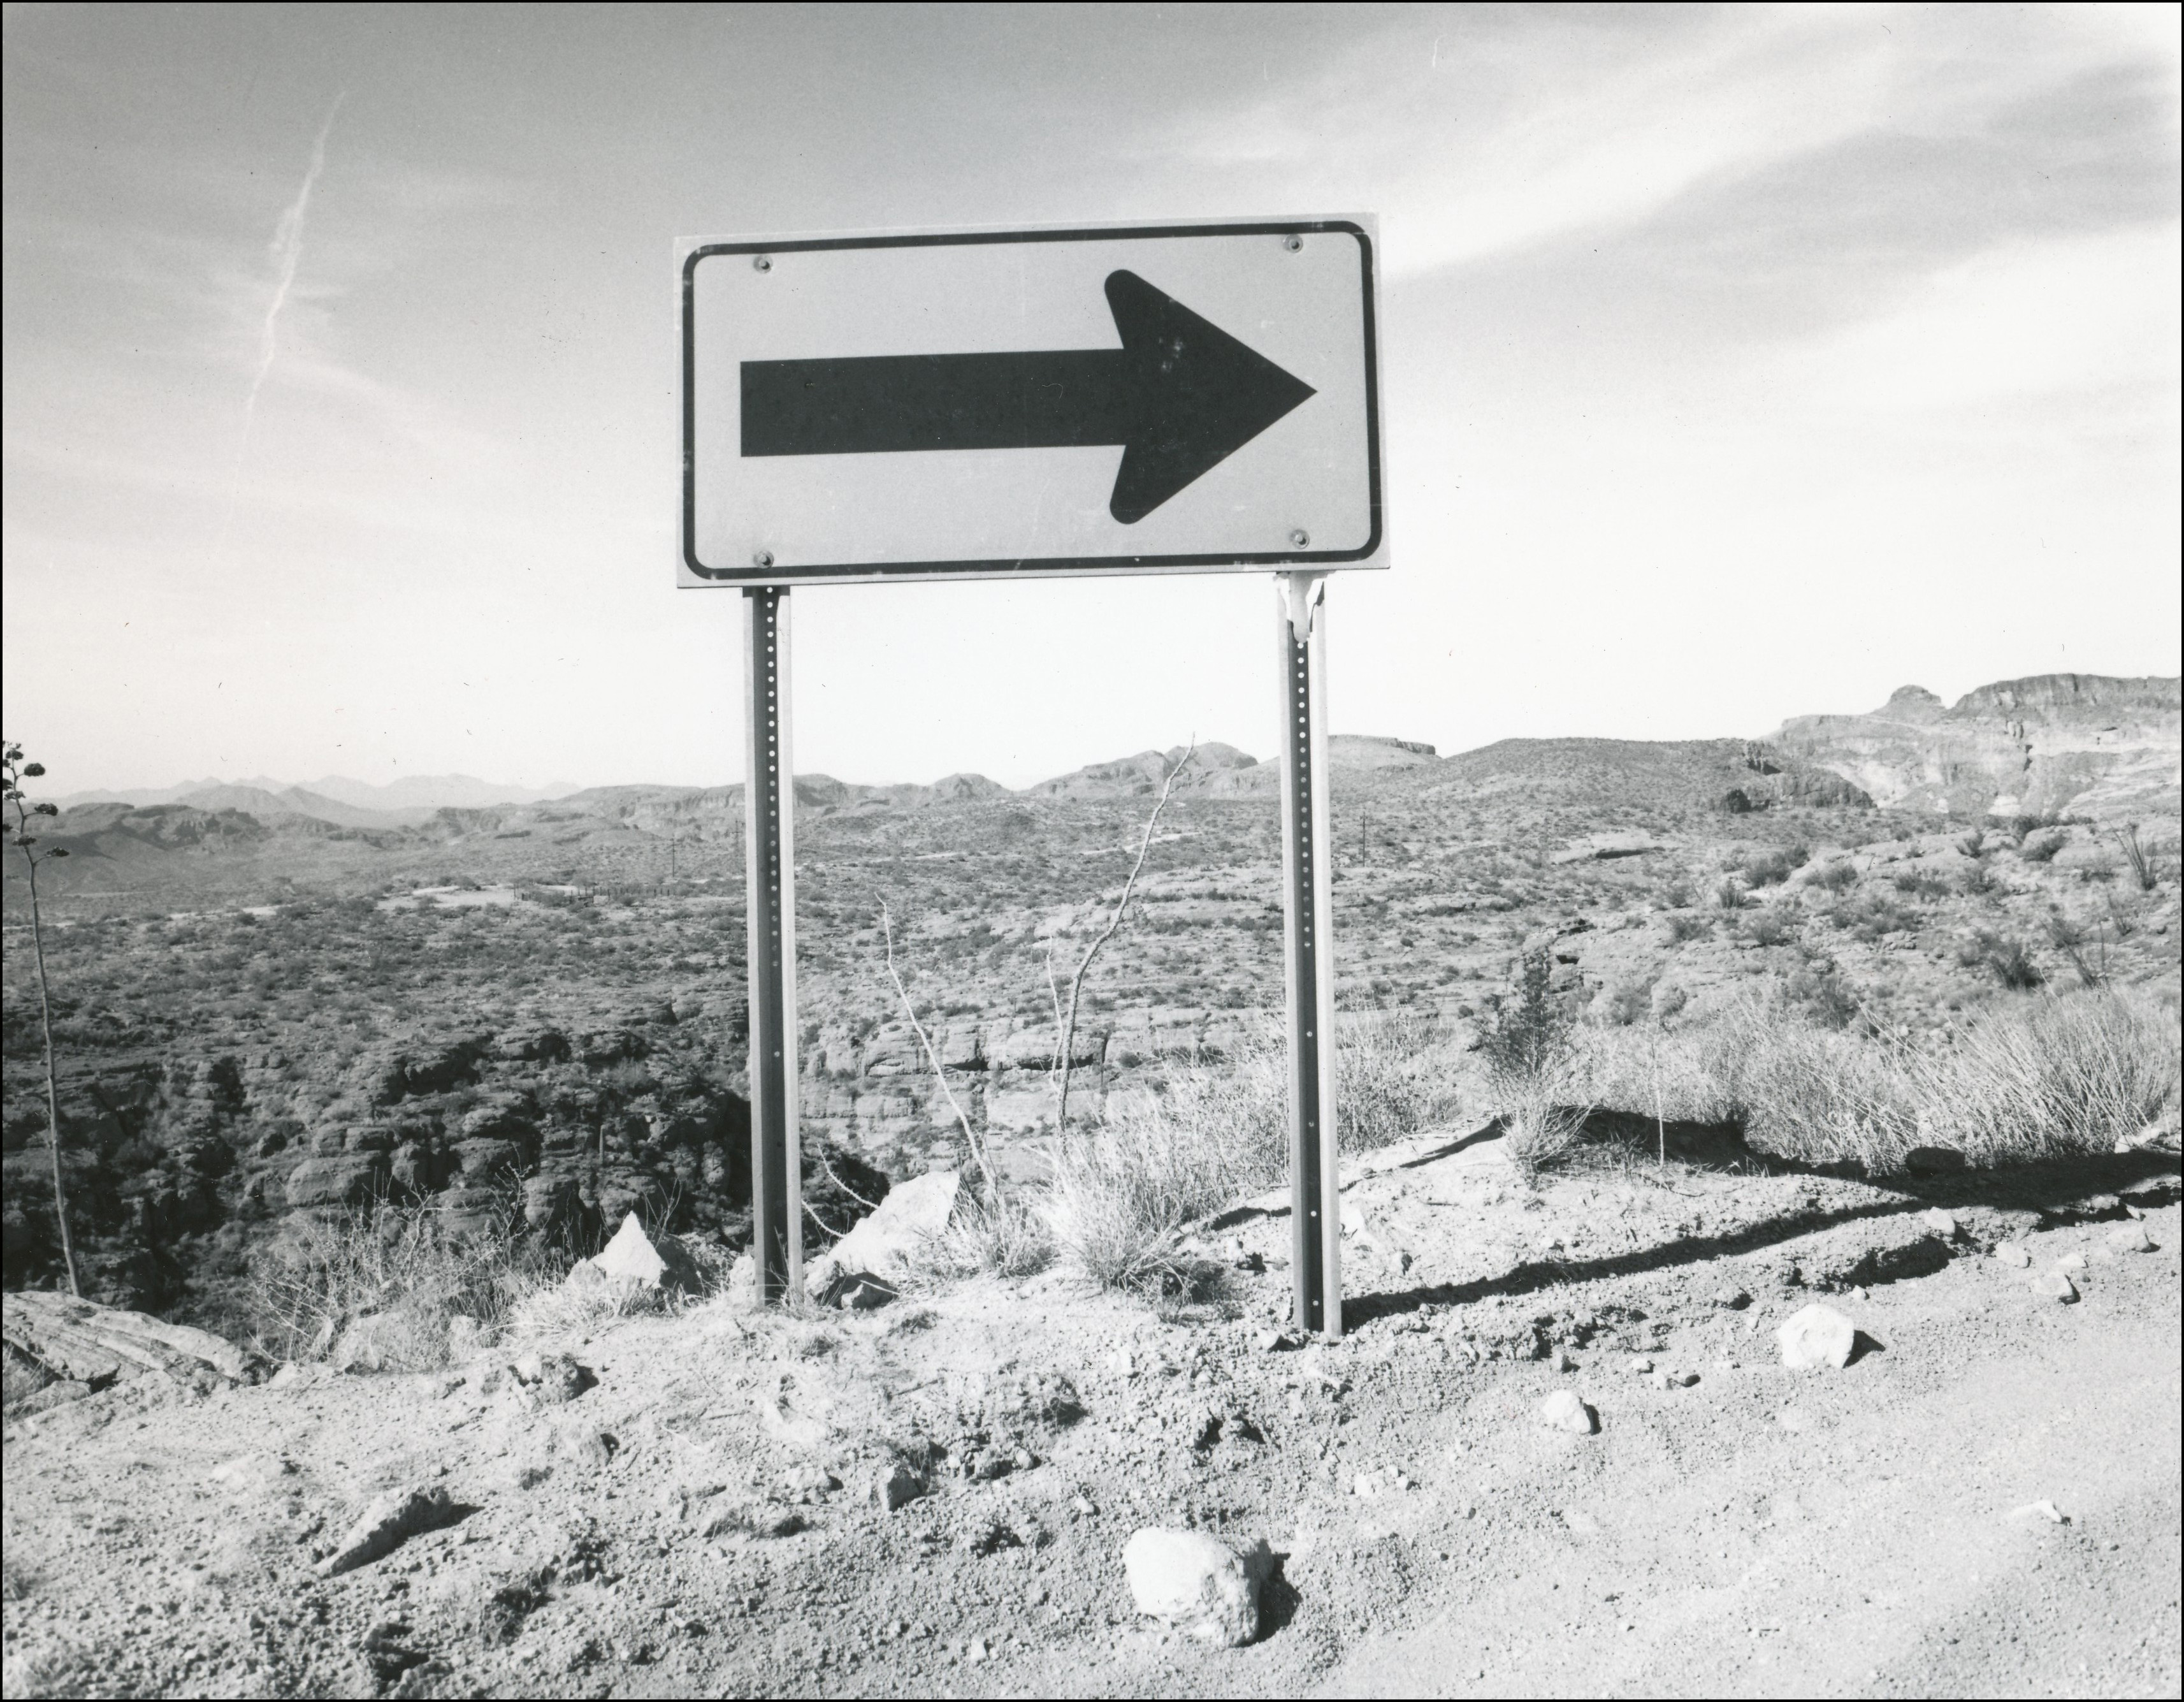 Roadside arrow sign at edge of dirt road with steep dropoff